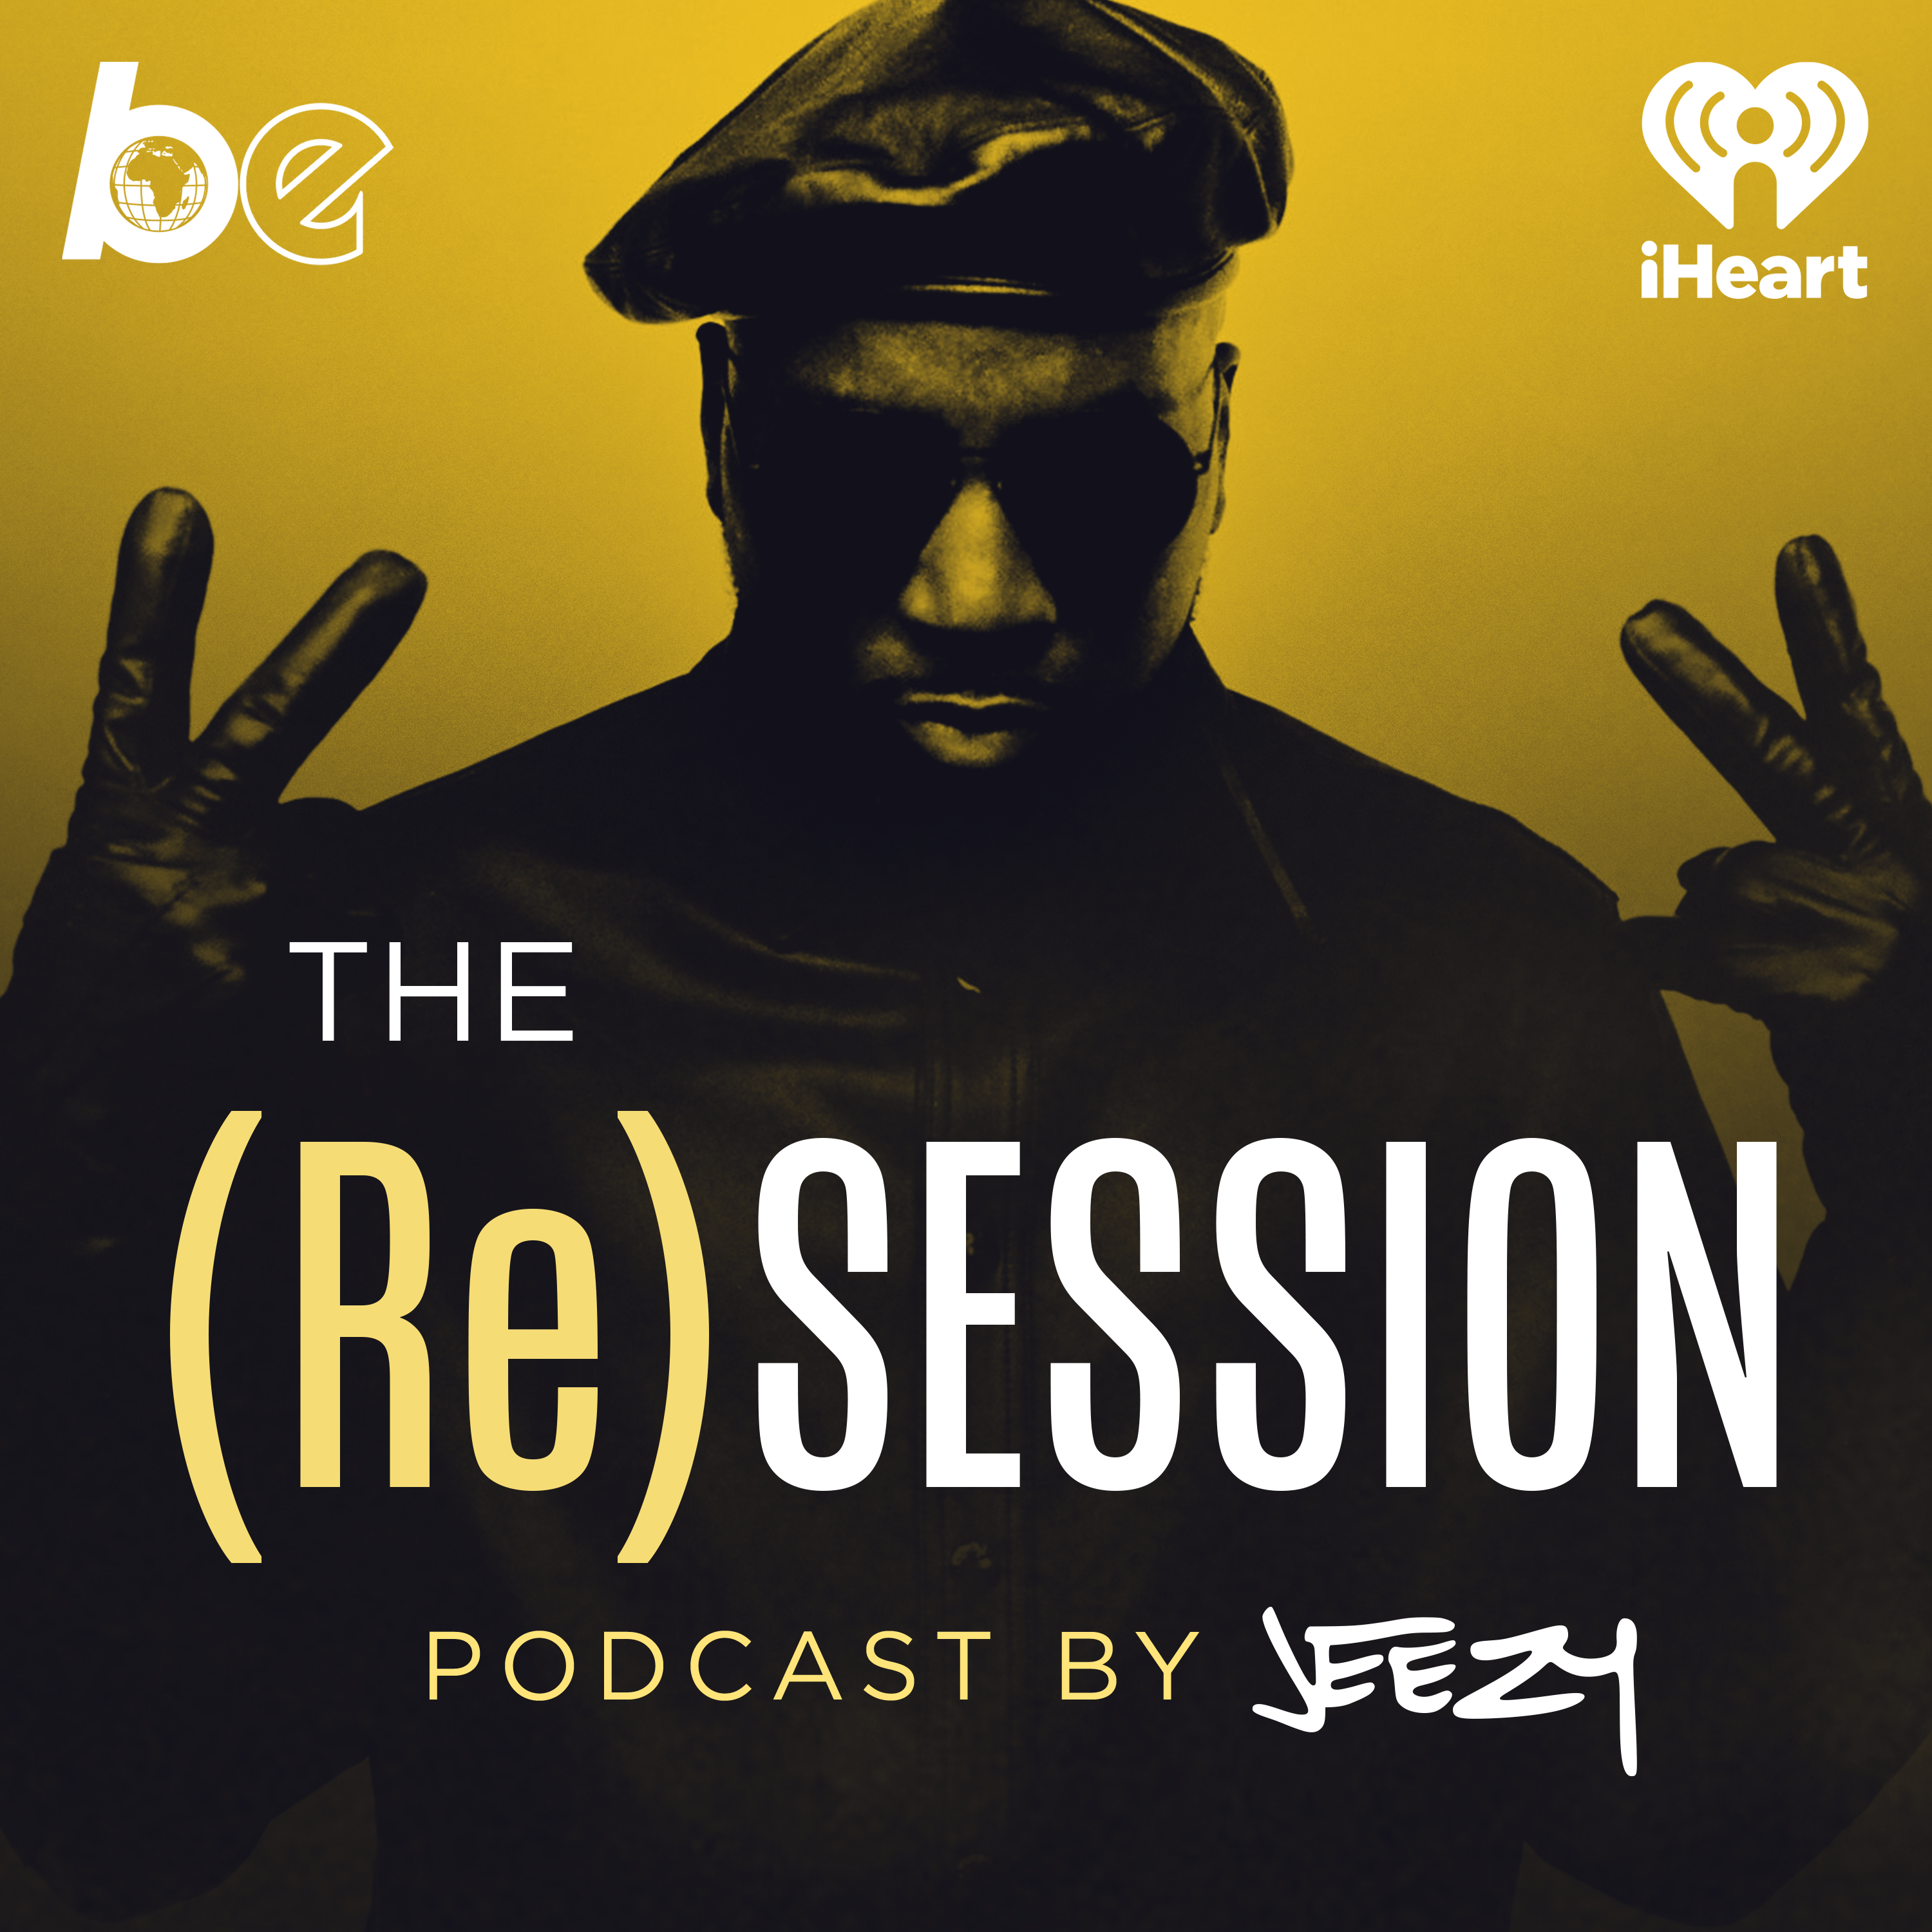 Byron Allen | Ep 4 | (Re)Session Podcast by Jeezy